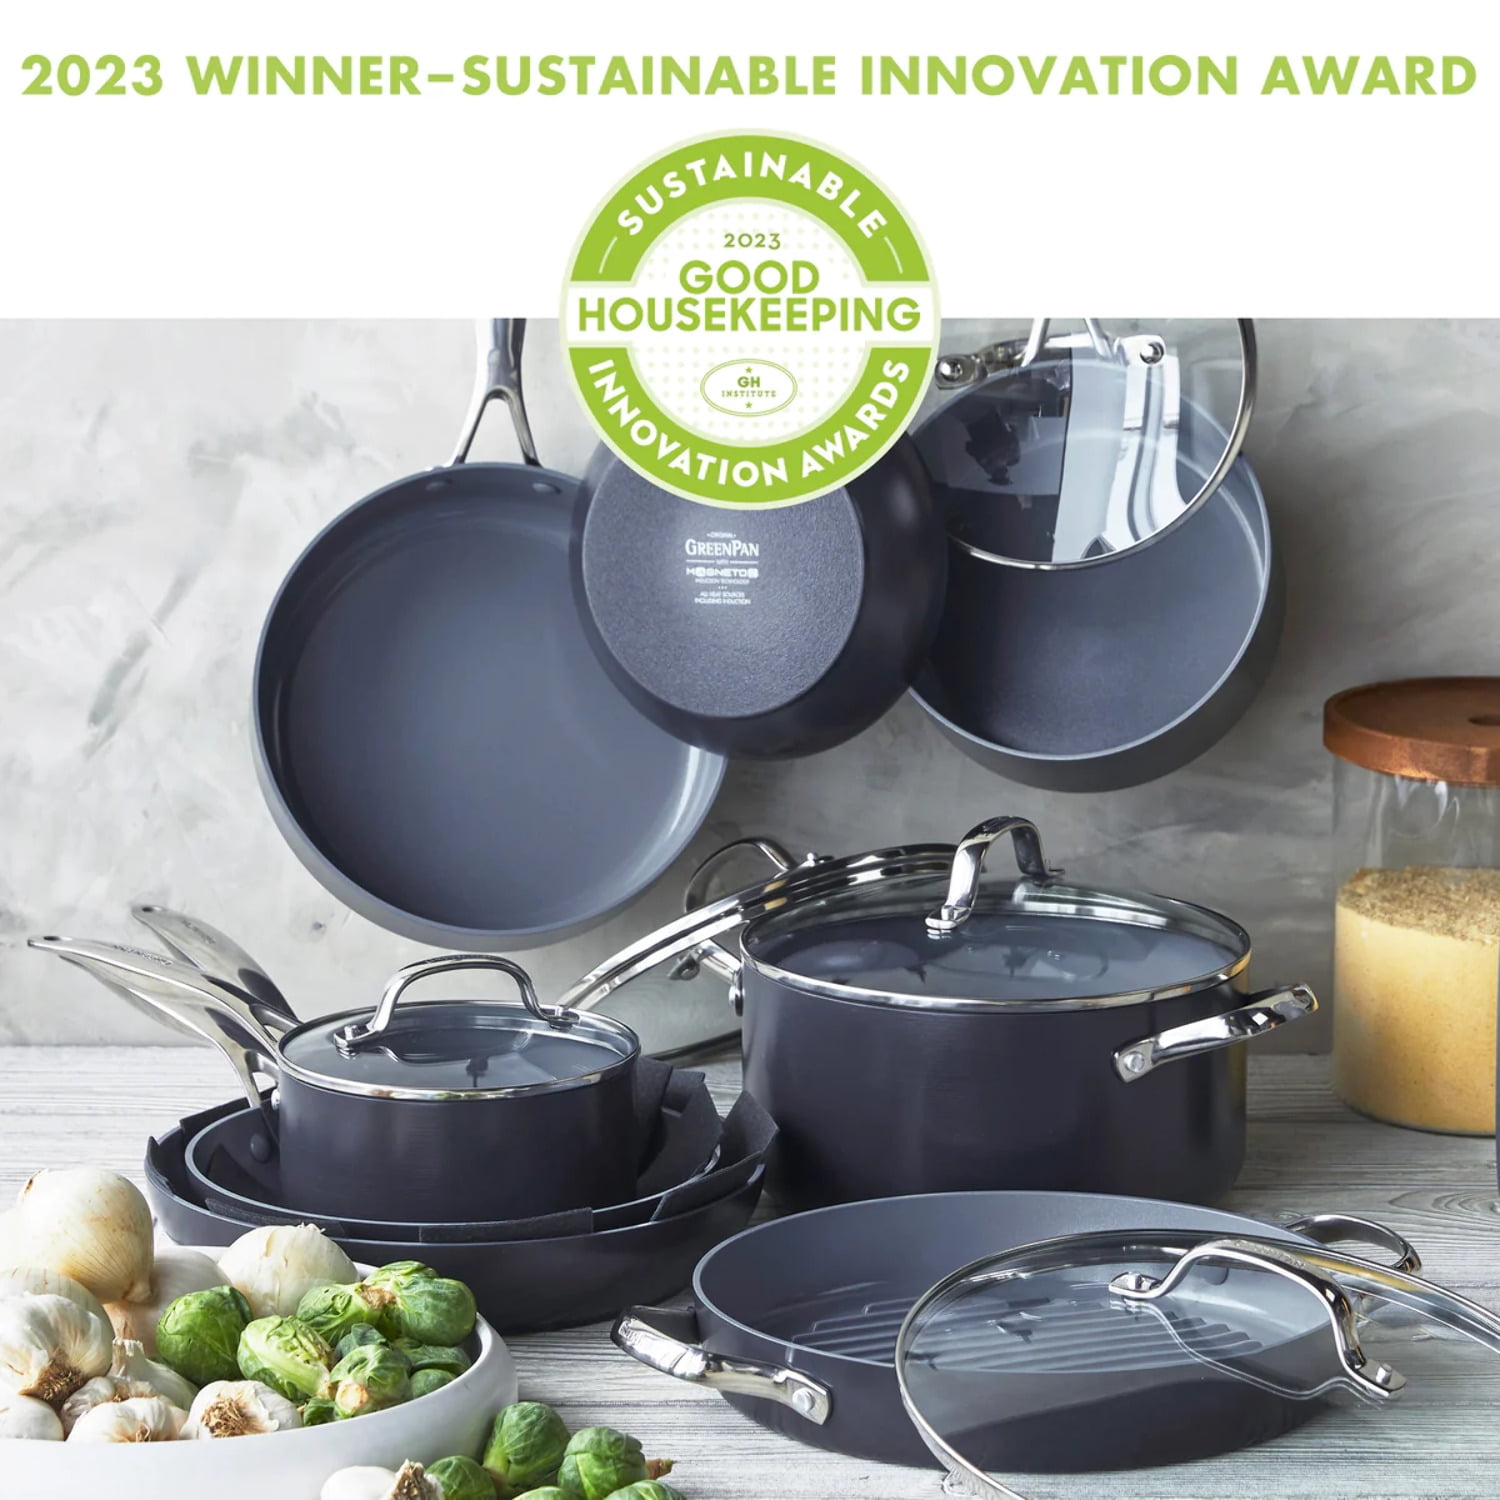 Shop These Nonstick GreenPan Cookware Sets Up to 34% Off